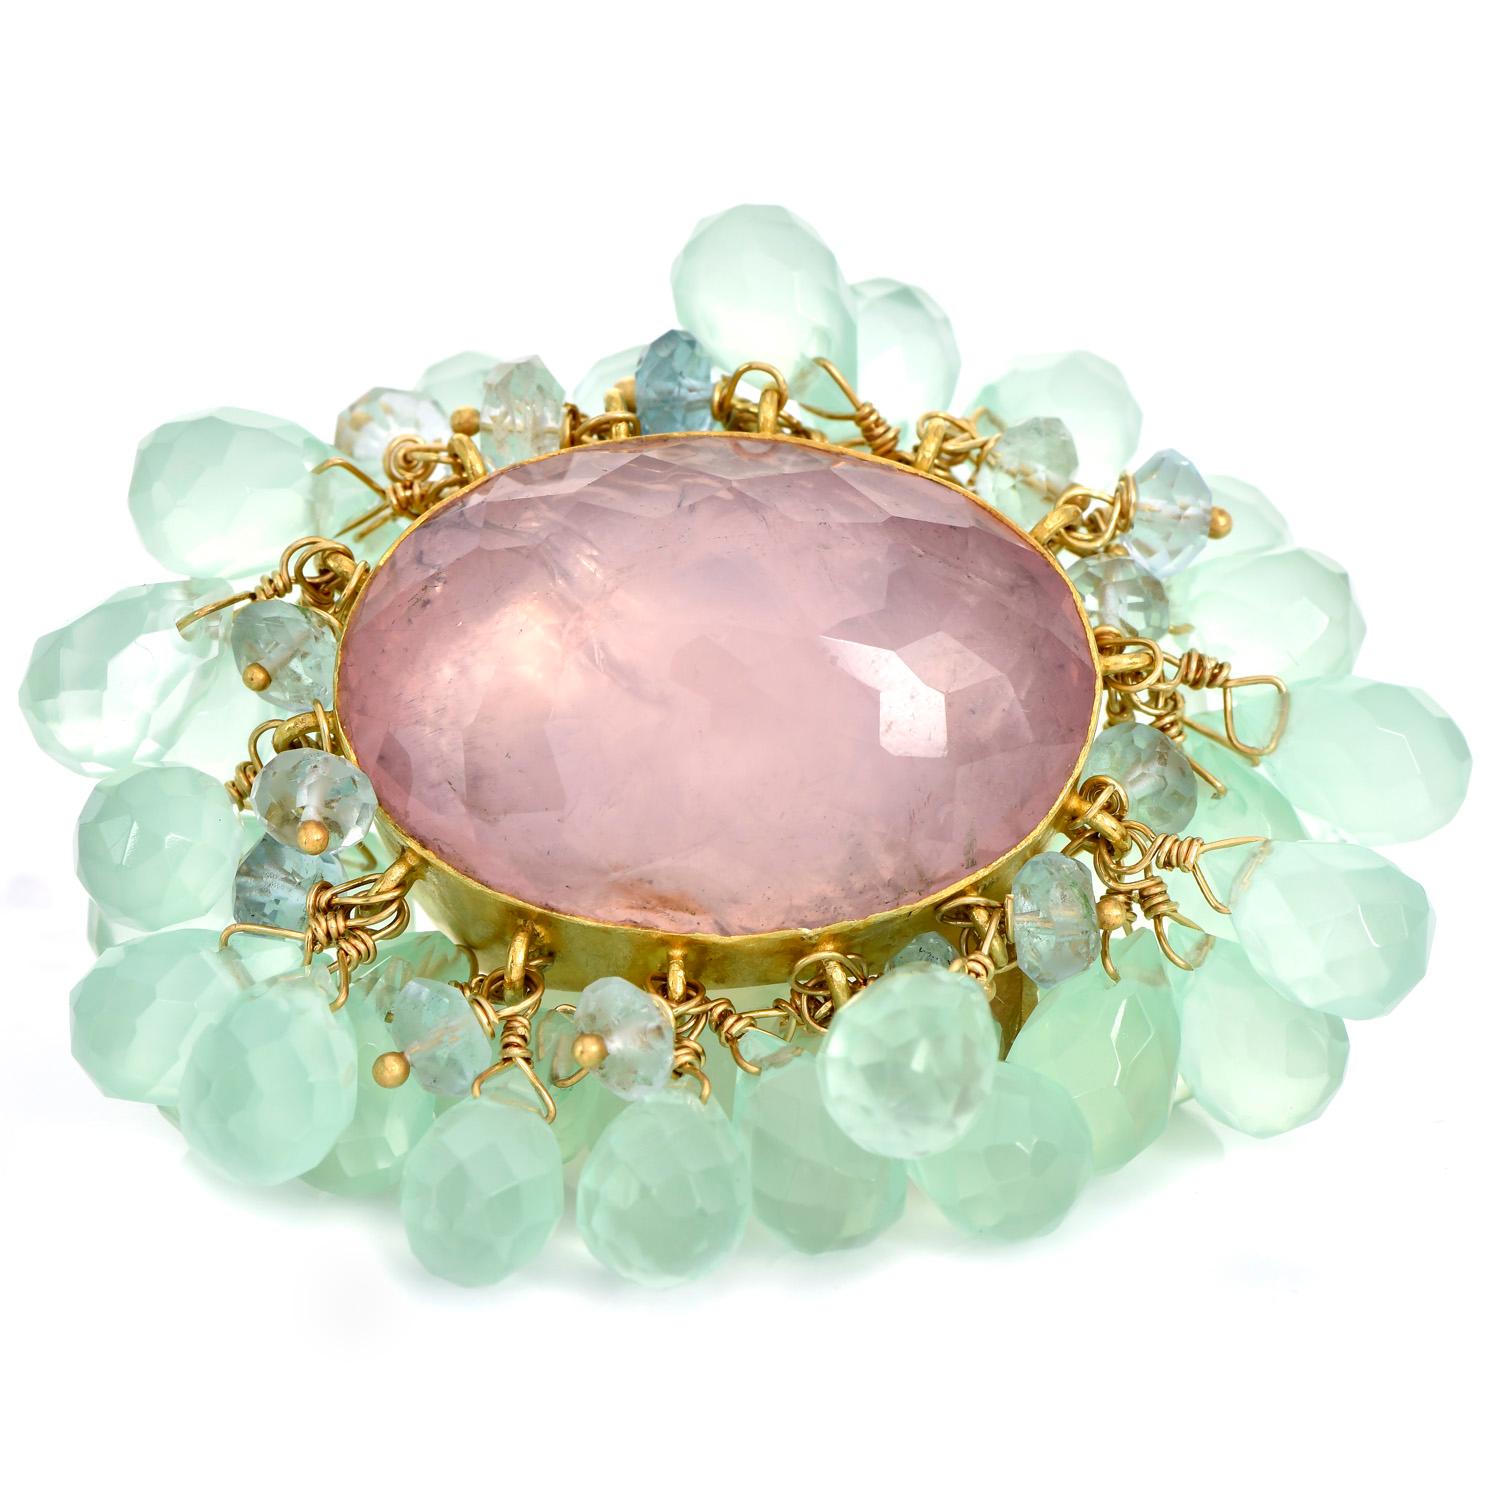 Designer Beaded Flower inspired Ring, dangles to enhance the fun and beauty of the piece,

Handcrafted in solid heavy 18K yellow gold, the center of this unique piece set with genuine pink Quartz Doublet Faceted Oval Cut, Bezel set  Gemstone,